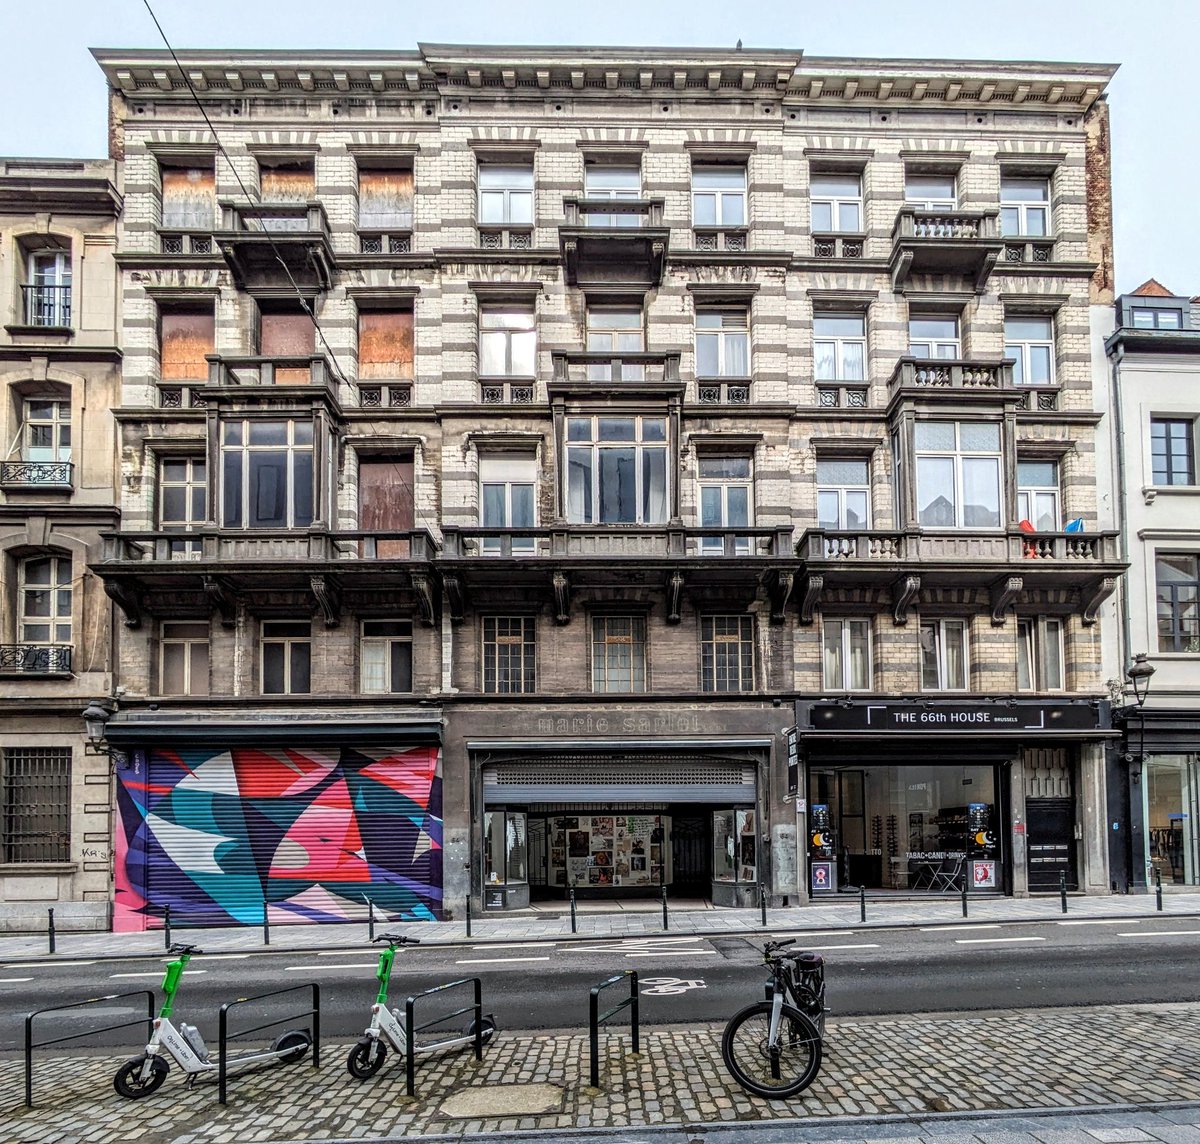 Rue de Namur 62-66, shops below apartments, around 1901. 62 (left) appears to have been abandoned for at least 20 years. At least I hope nobody's living there. I wonder how stable it is.